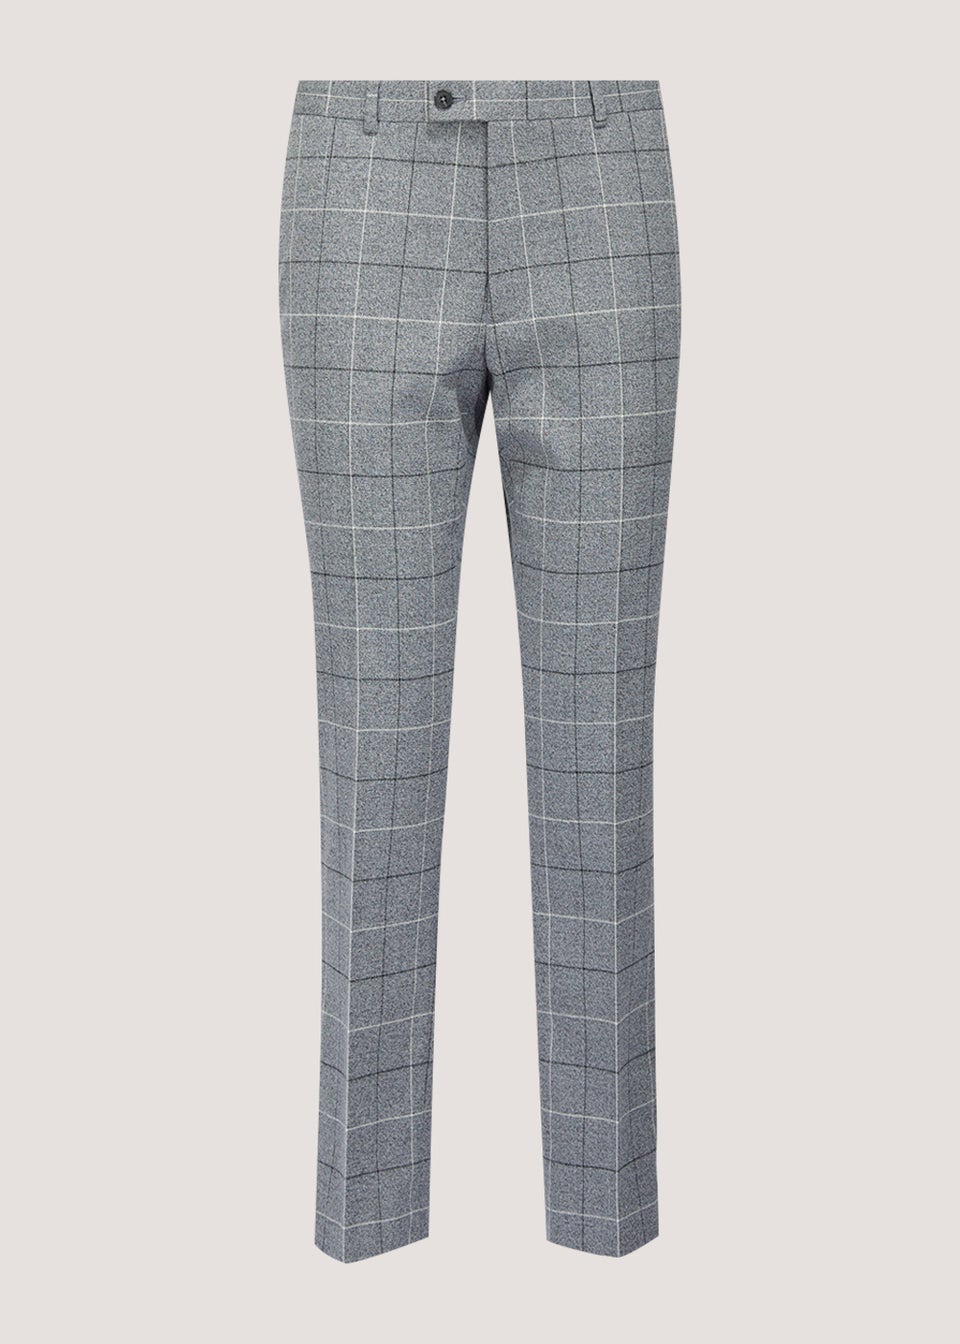 Taylor & Wright Grey Check Tailored Fit Suit Trousers - Matalan